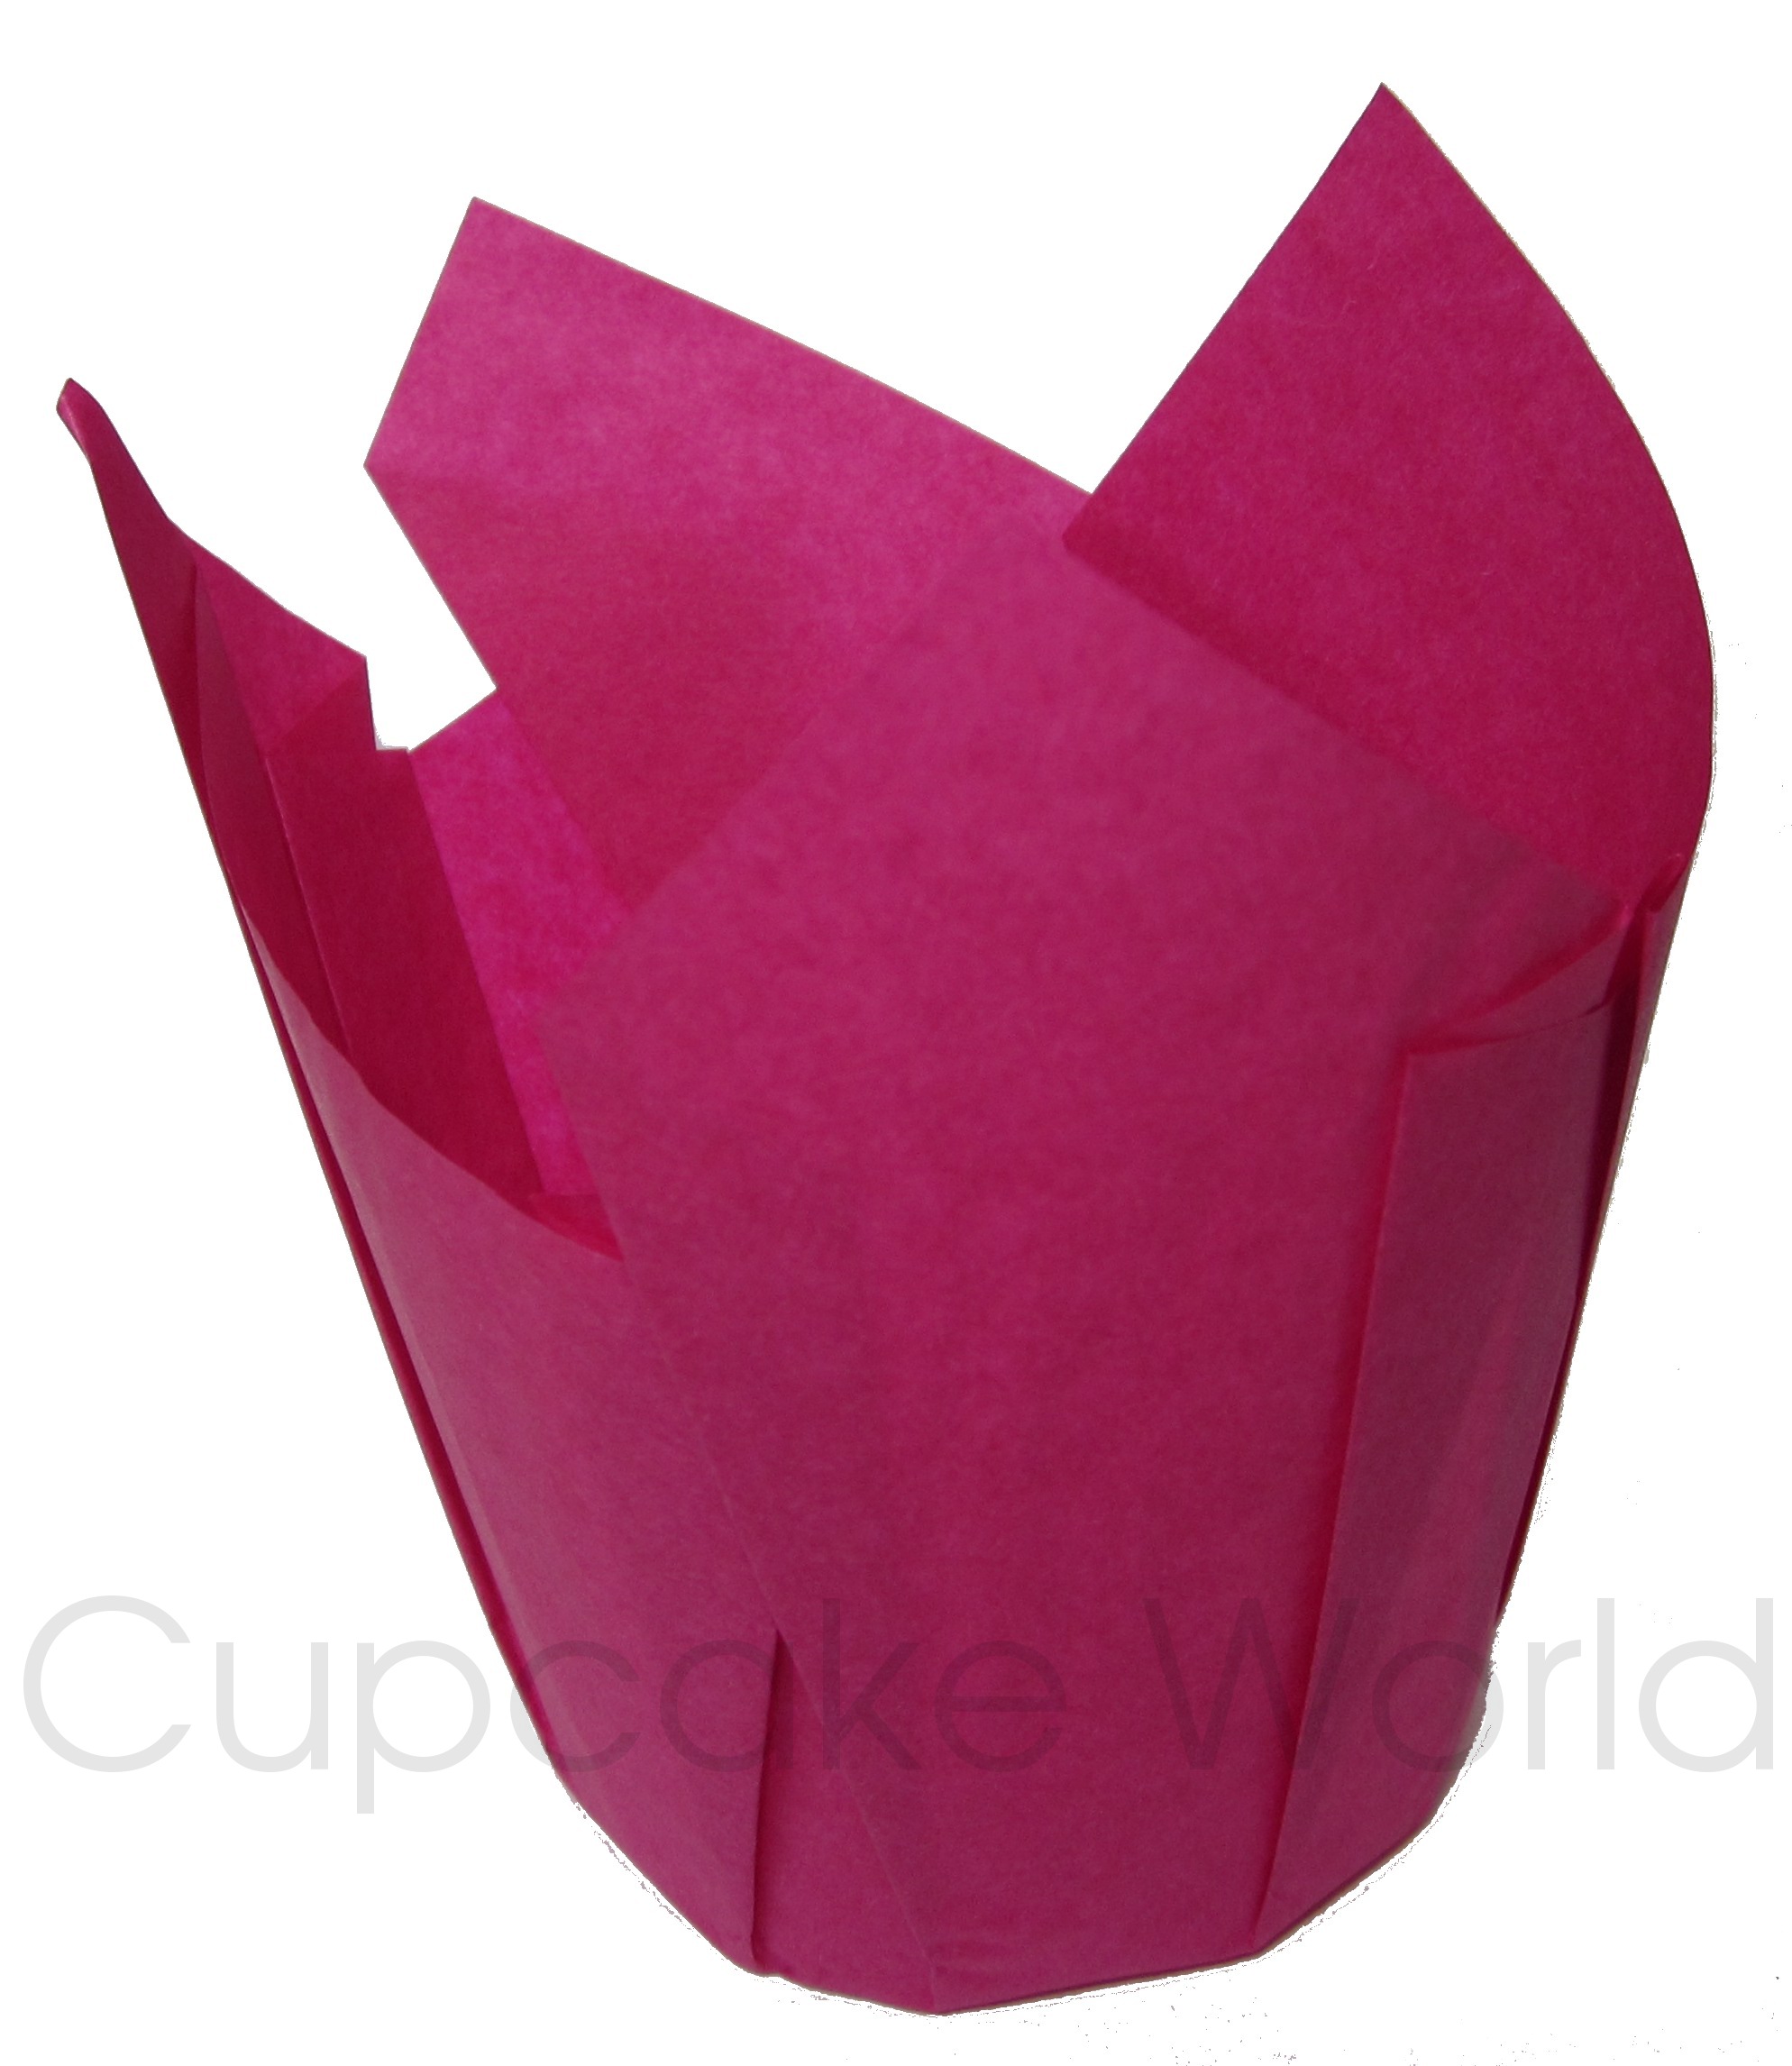 100PC CAFE STYLE HOT PINK PAPER CUPCAKE MUFFIN WRAPS STANDARD - Click Image to Close